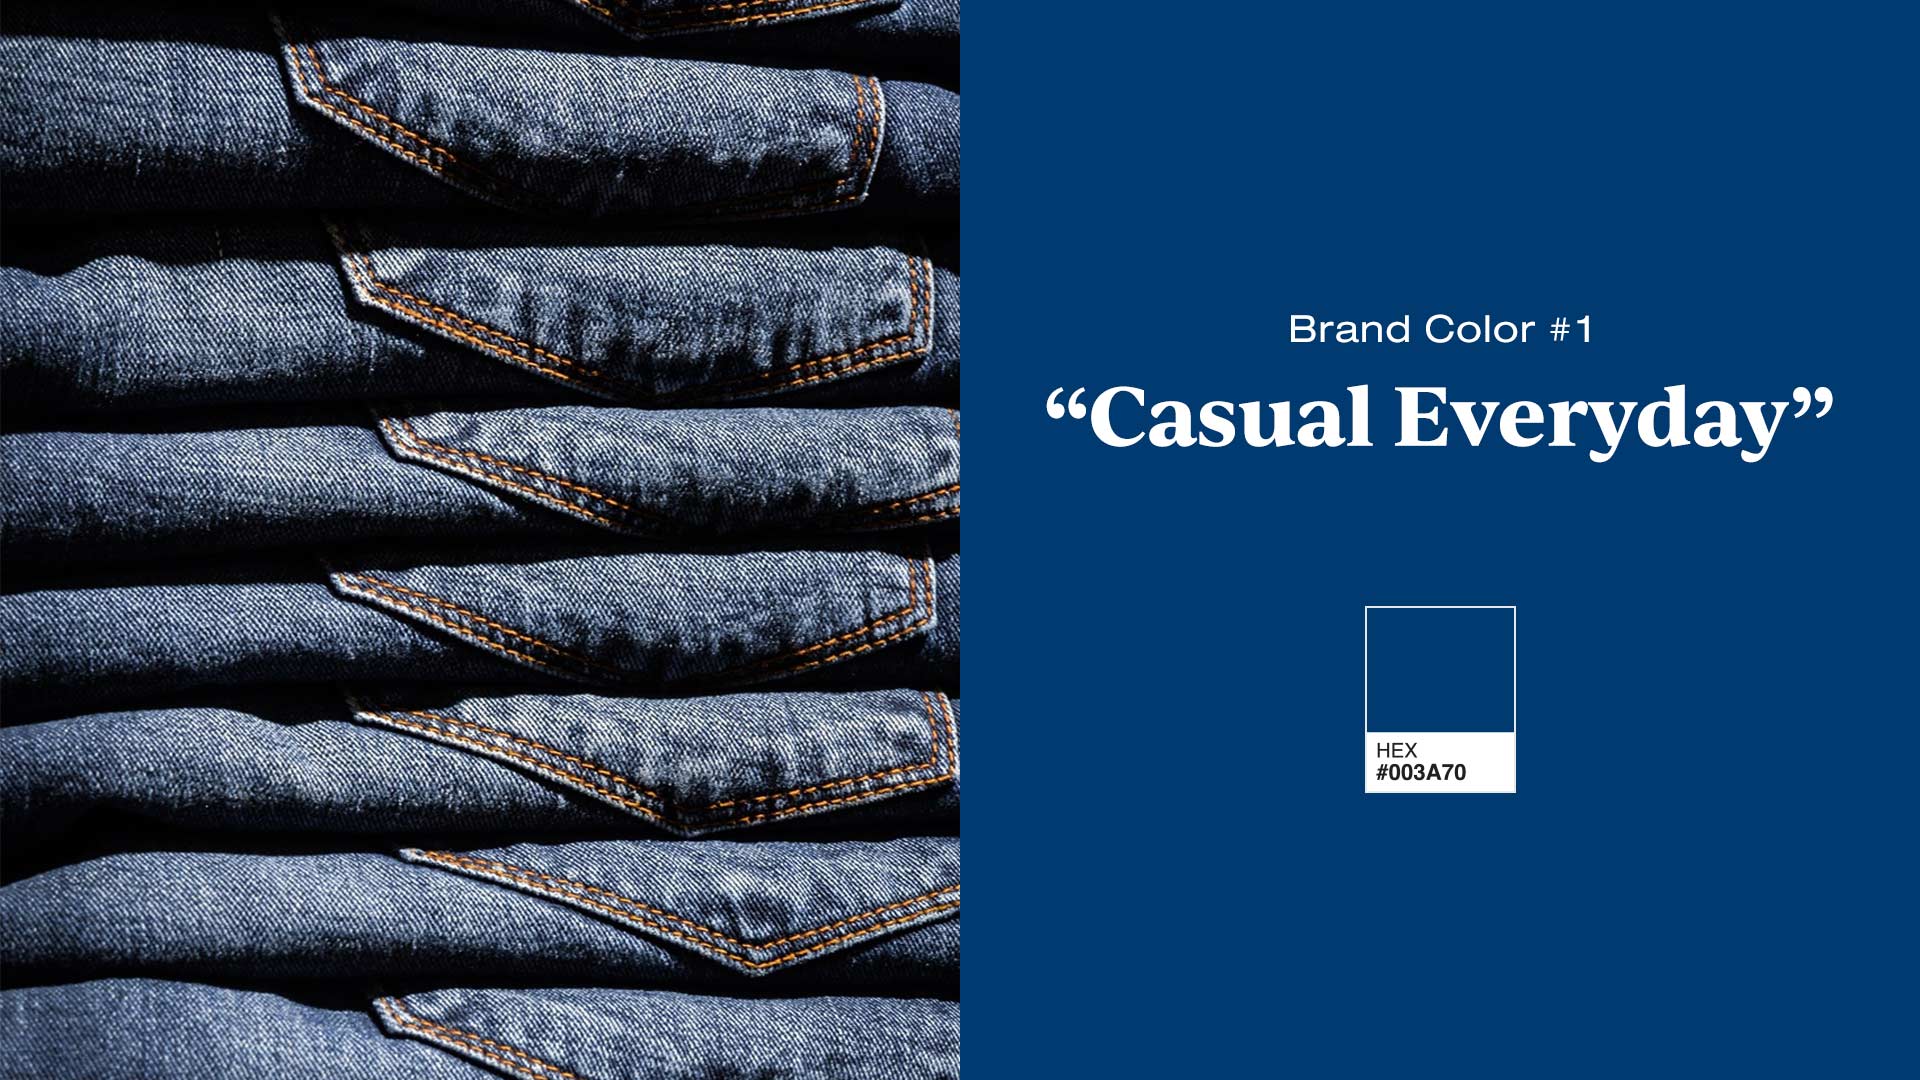 Brand Color 1 - Casual Everyday